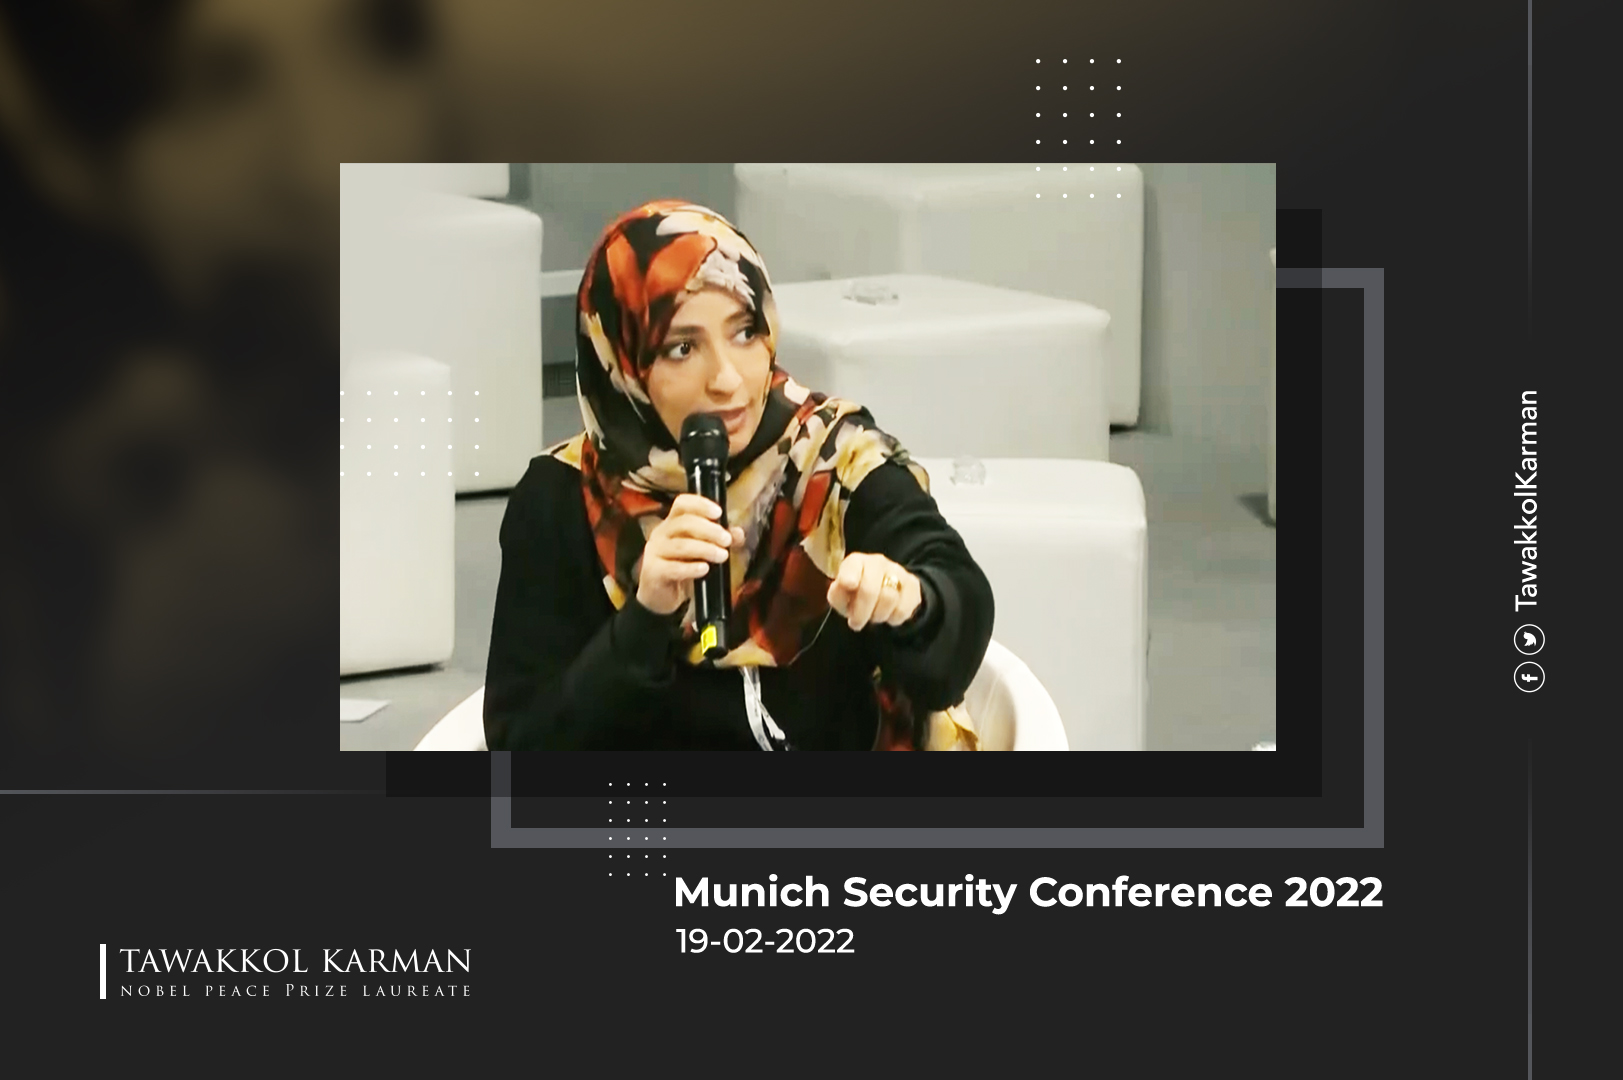 Tawakkol Karman's Participation in Munich Security Conference 2022